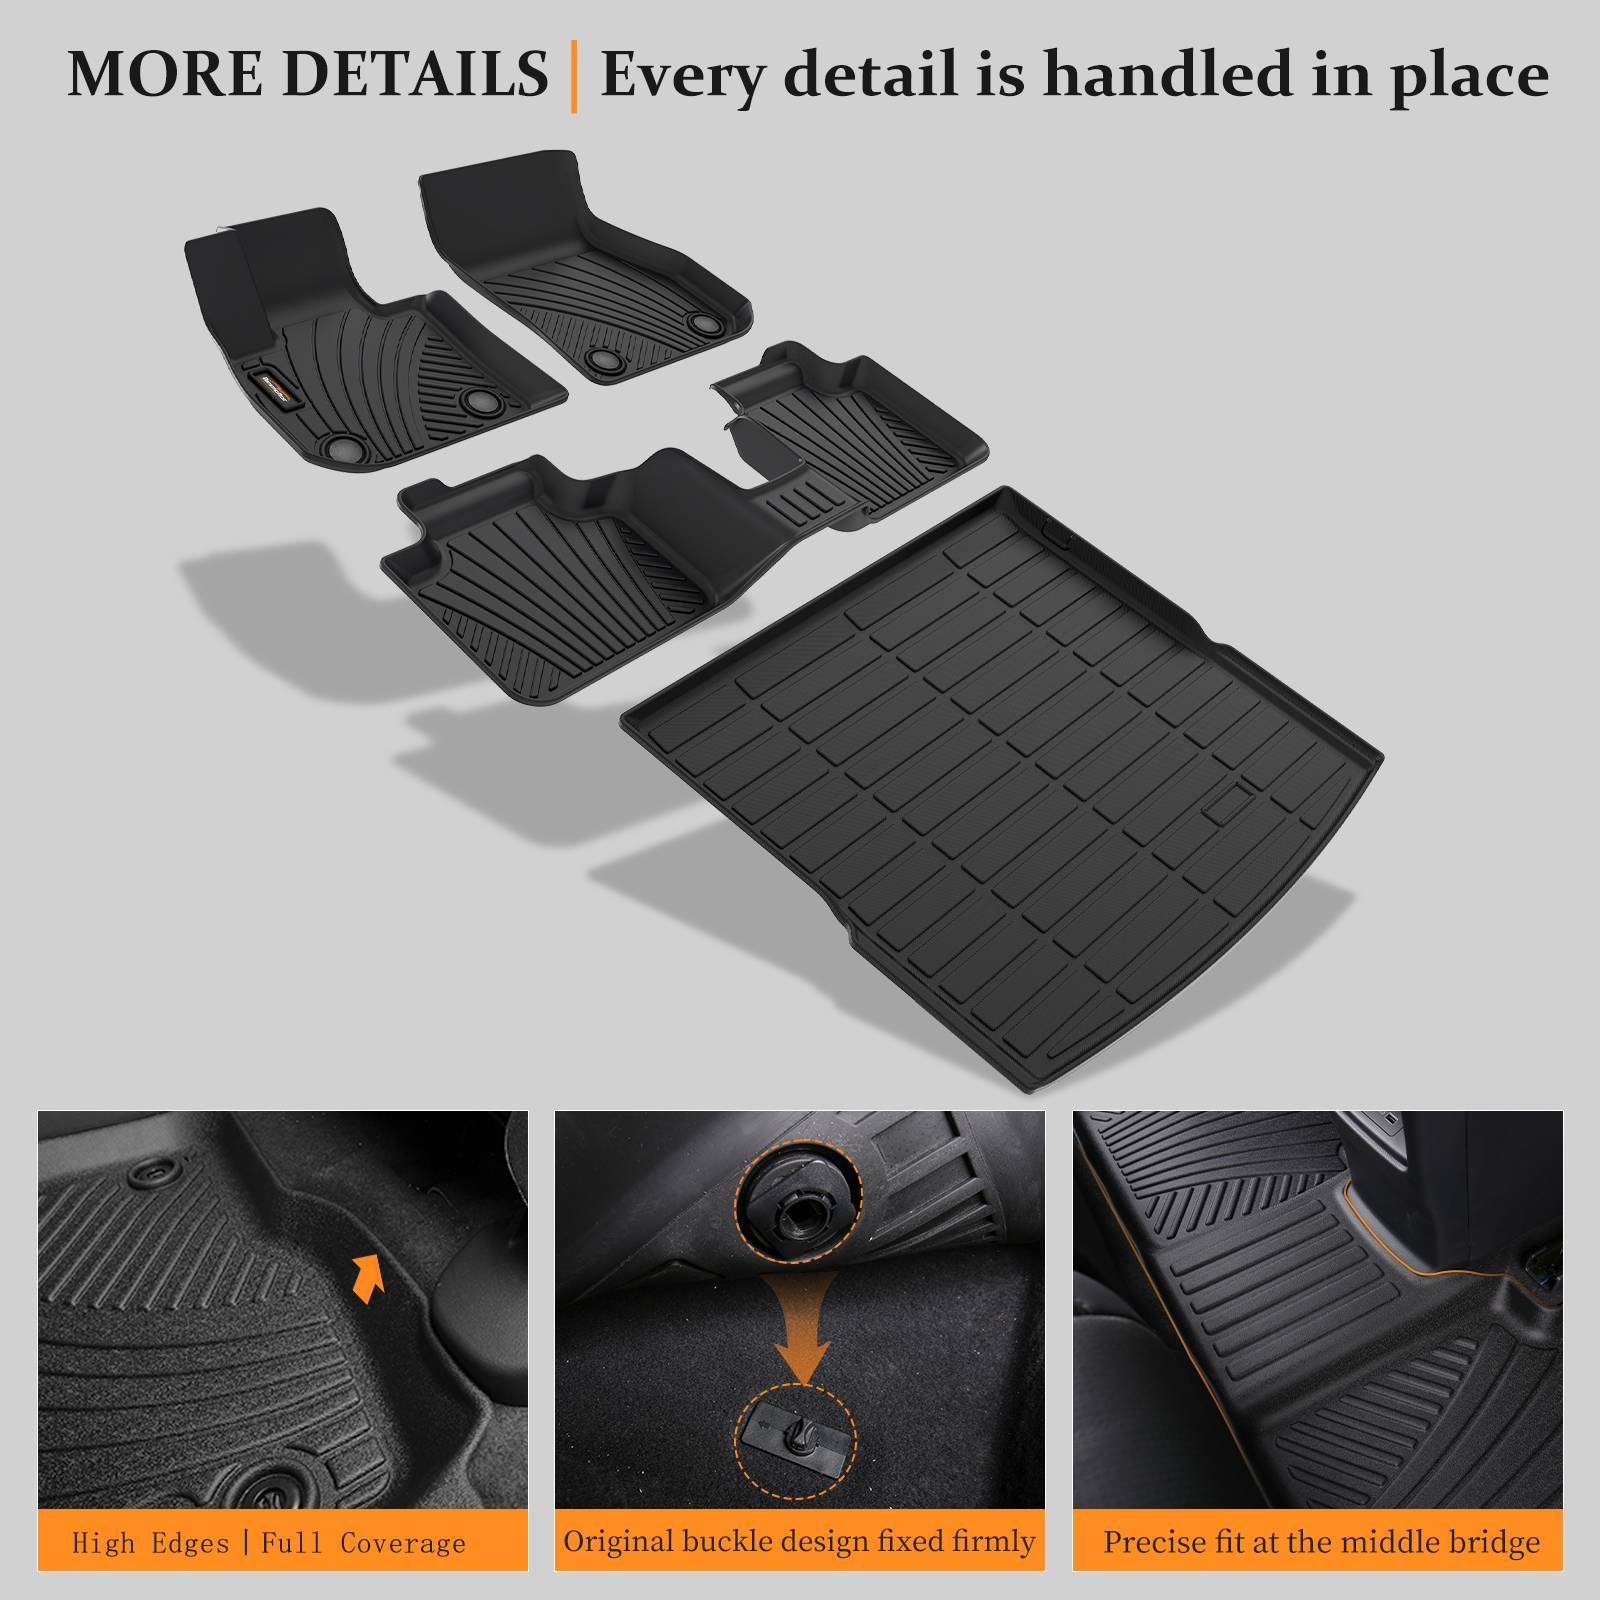 Binmotor-Floor Mats for Kia Sorento 6/7 passenger Waterproof Car Mats All Weather Guard Heavy Duty TPE Automotive Floor Liners 1st, 2nd, and 3rd Row Accessories - Black（compatible year 2016-2020）